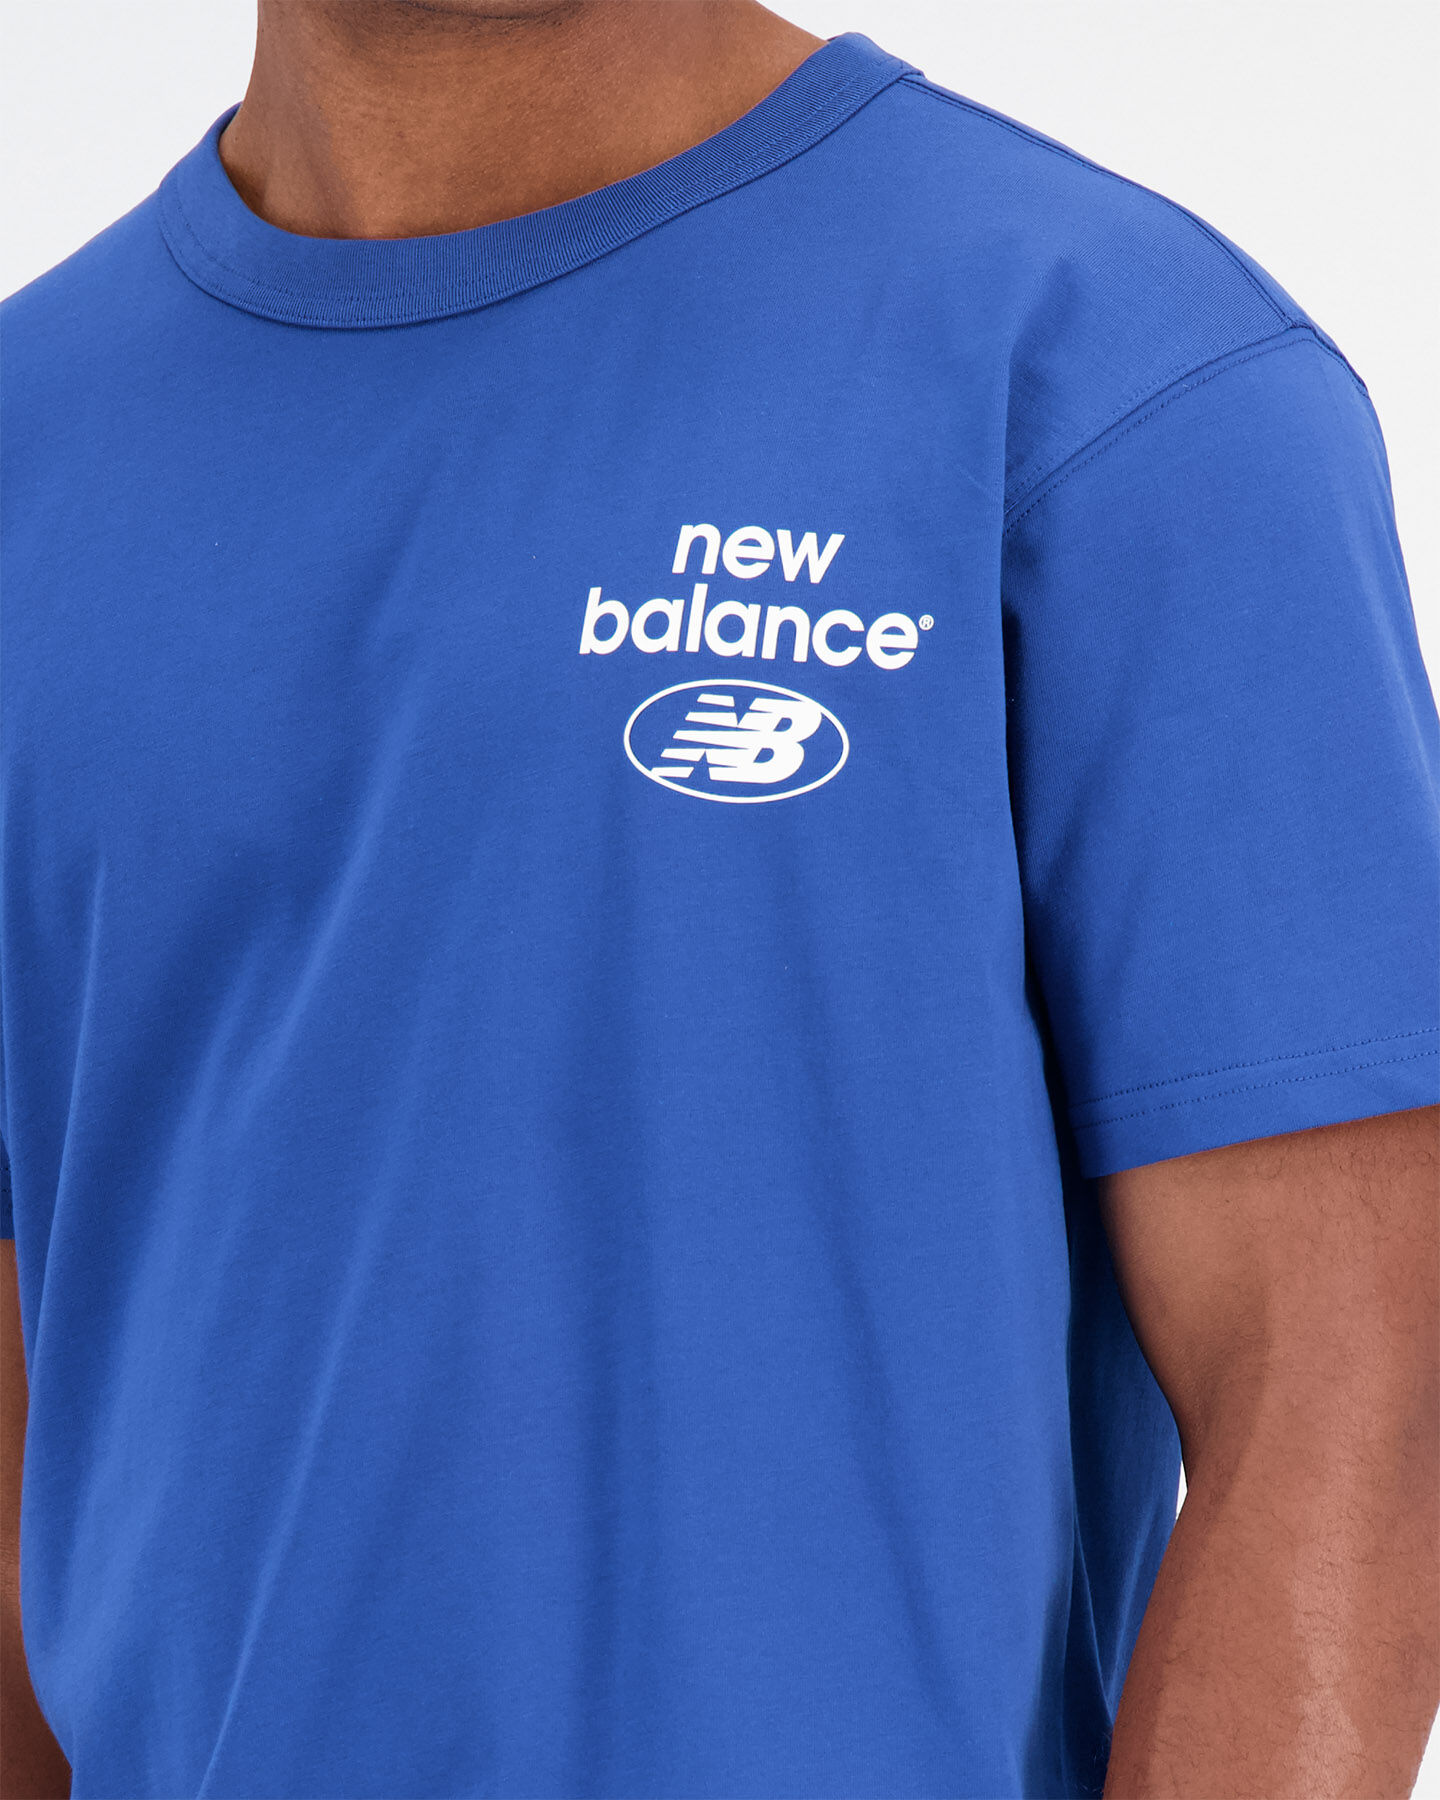  T-Shirt NEW BALANCE ESSENTIAL REIMAGINED M S5533705|-|S* scatto 3